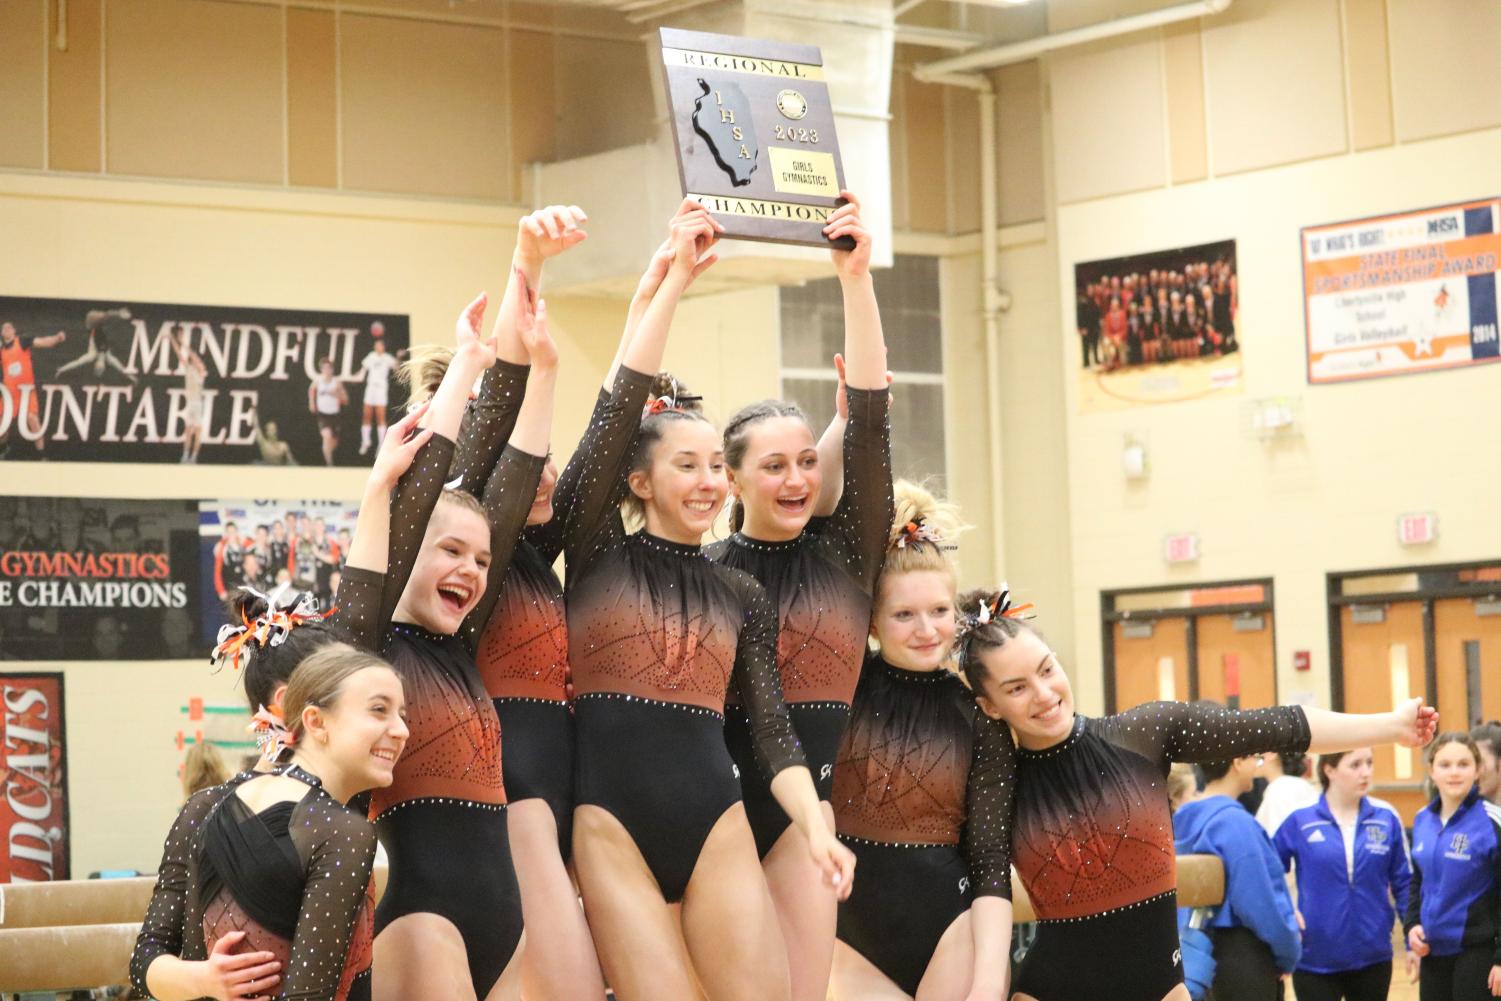 The girls varsity gymnastics team poses with their regional award held up by senior Anna Becker and junior Ally Humbert. The entire team advanced to conference, taking place at Stevenson High School on Wednesday, Feb. 8.